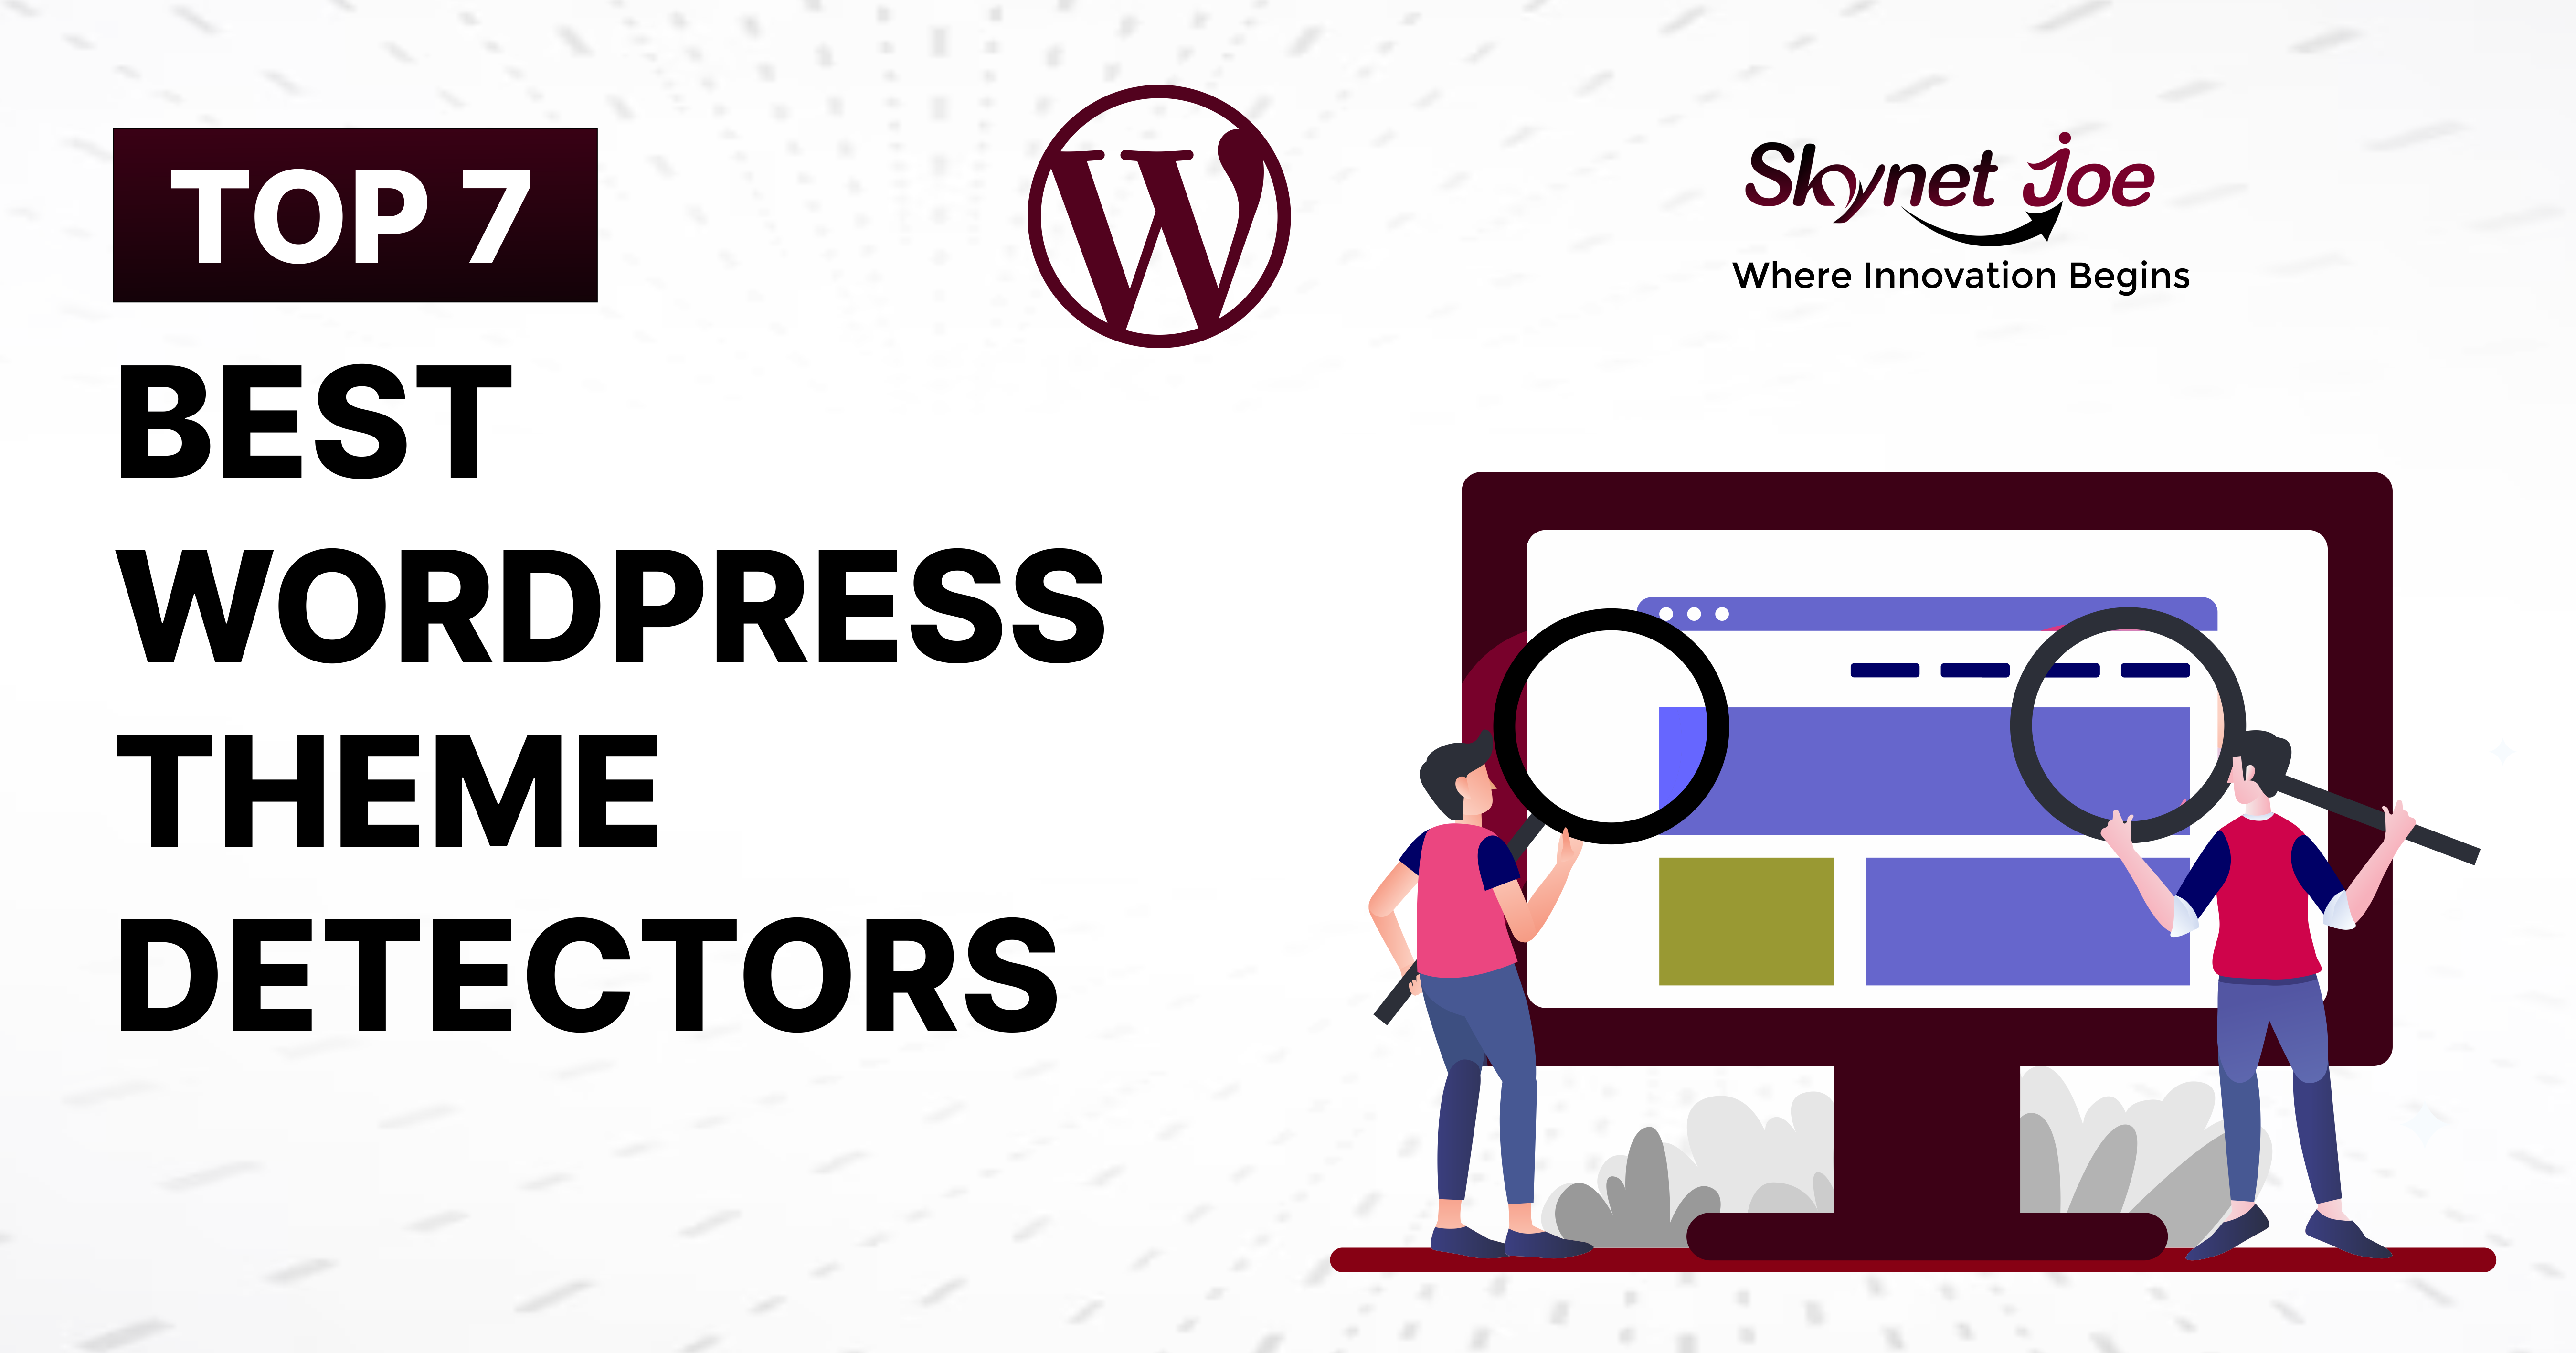 WordPress Theme Detectors Theme Detection Tools Discover WordPress Themes Identify Active Plugins Powerful Theme Detectors SoftwareFindr Software Directory WhatRuns Website Technologies